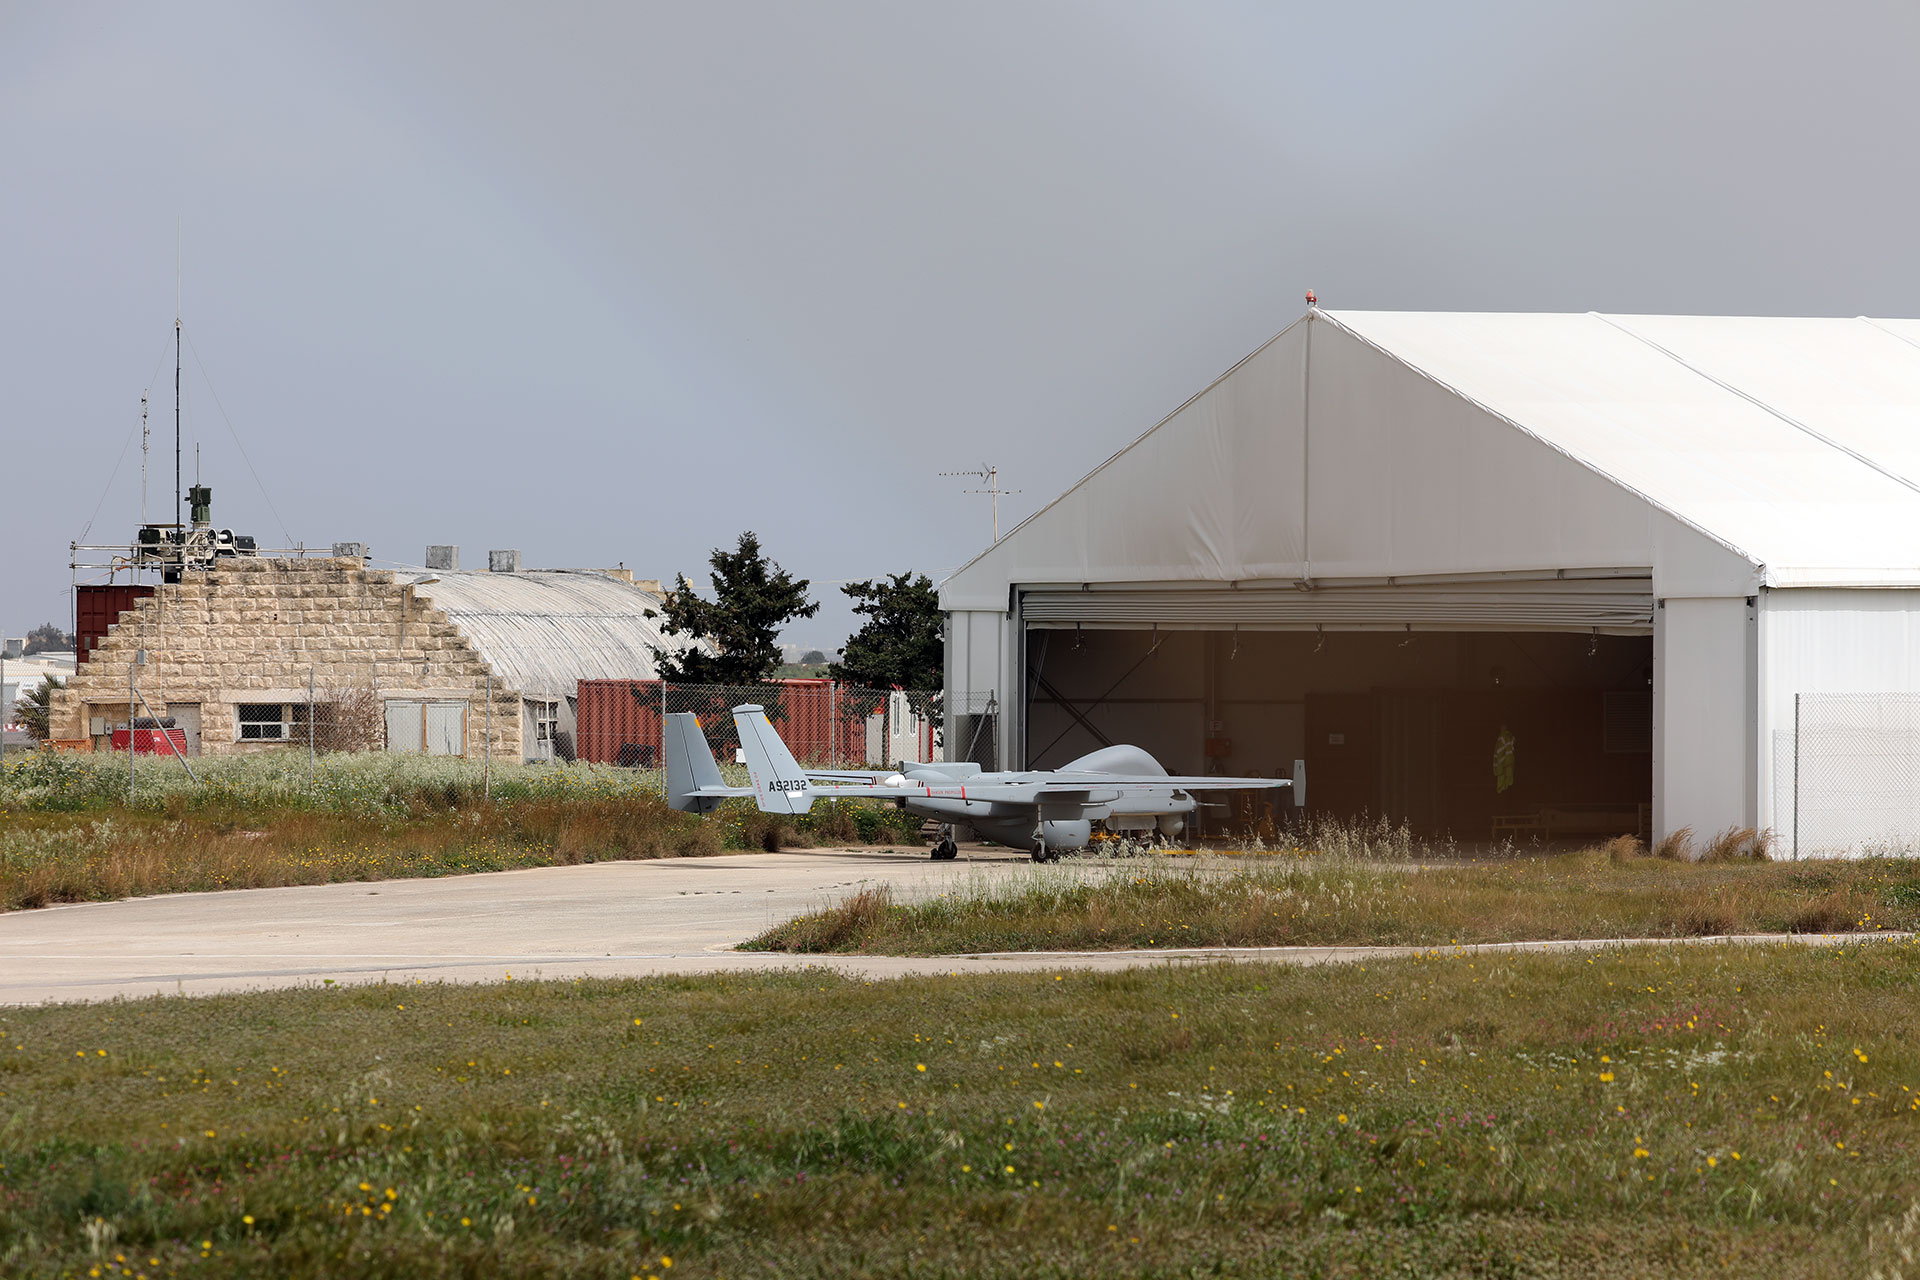 The temporary hangar of the drone.